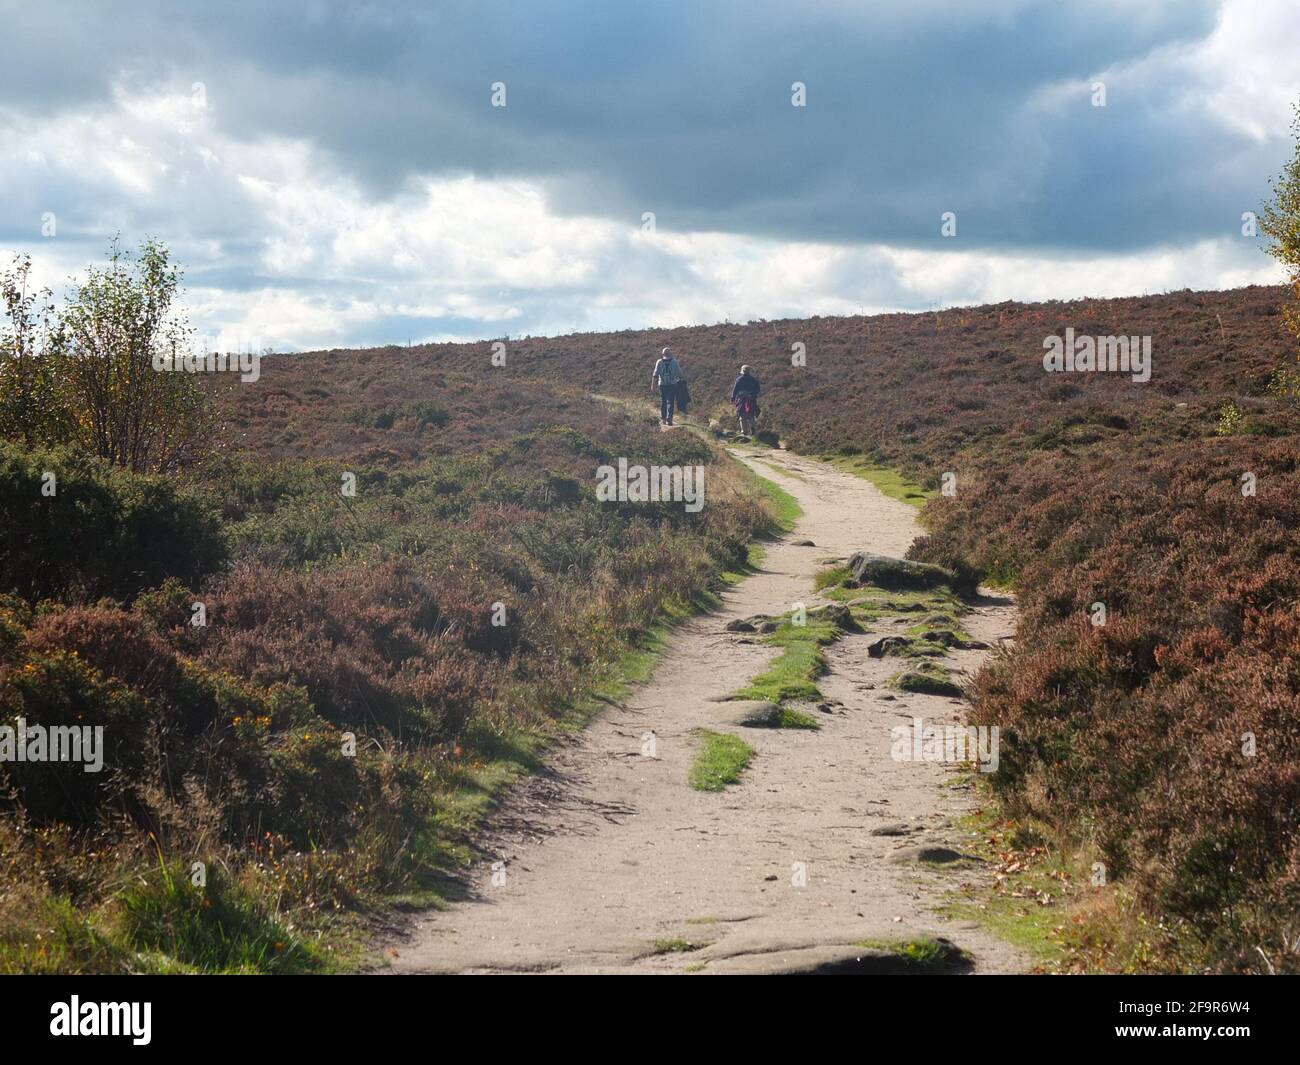 A pair of walkers on a path on Stanton Moor near Matlock in Derbyshire Peak District in October with browning heather on either side of the path Stock Photo